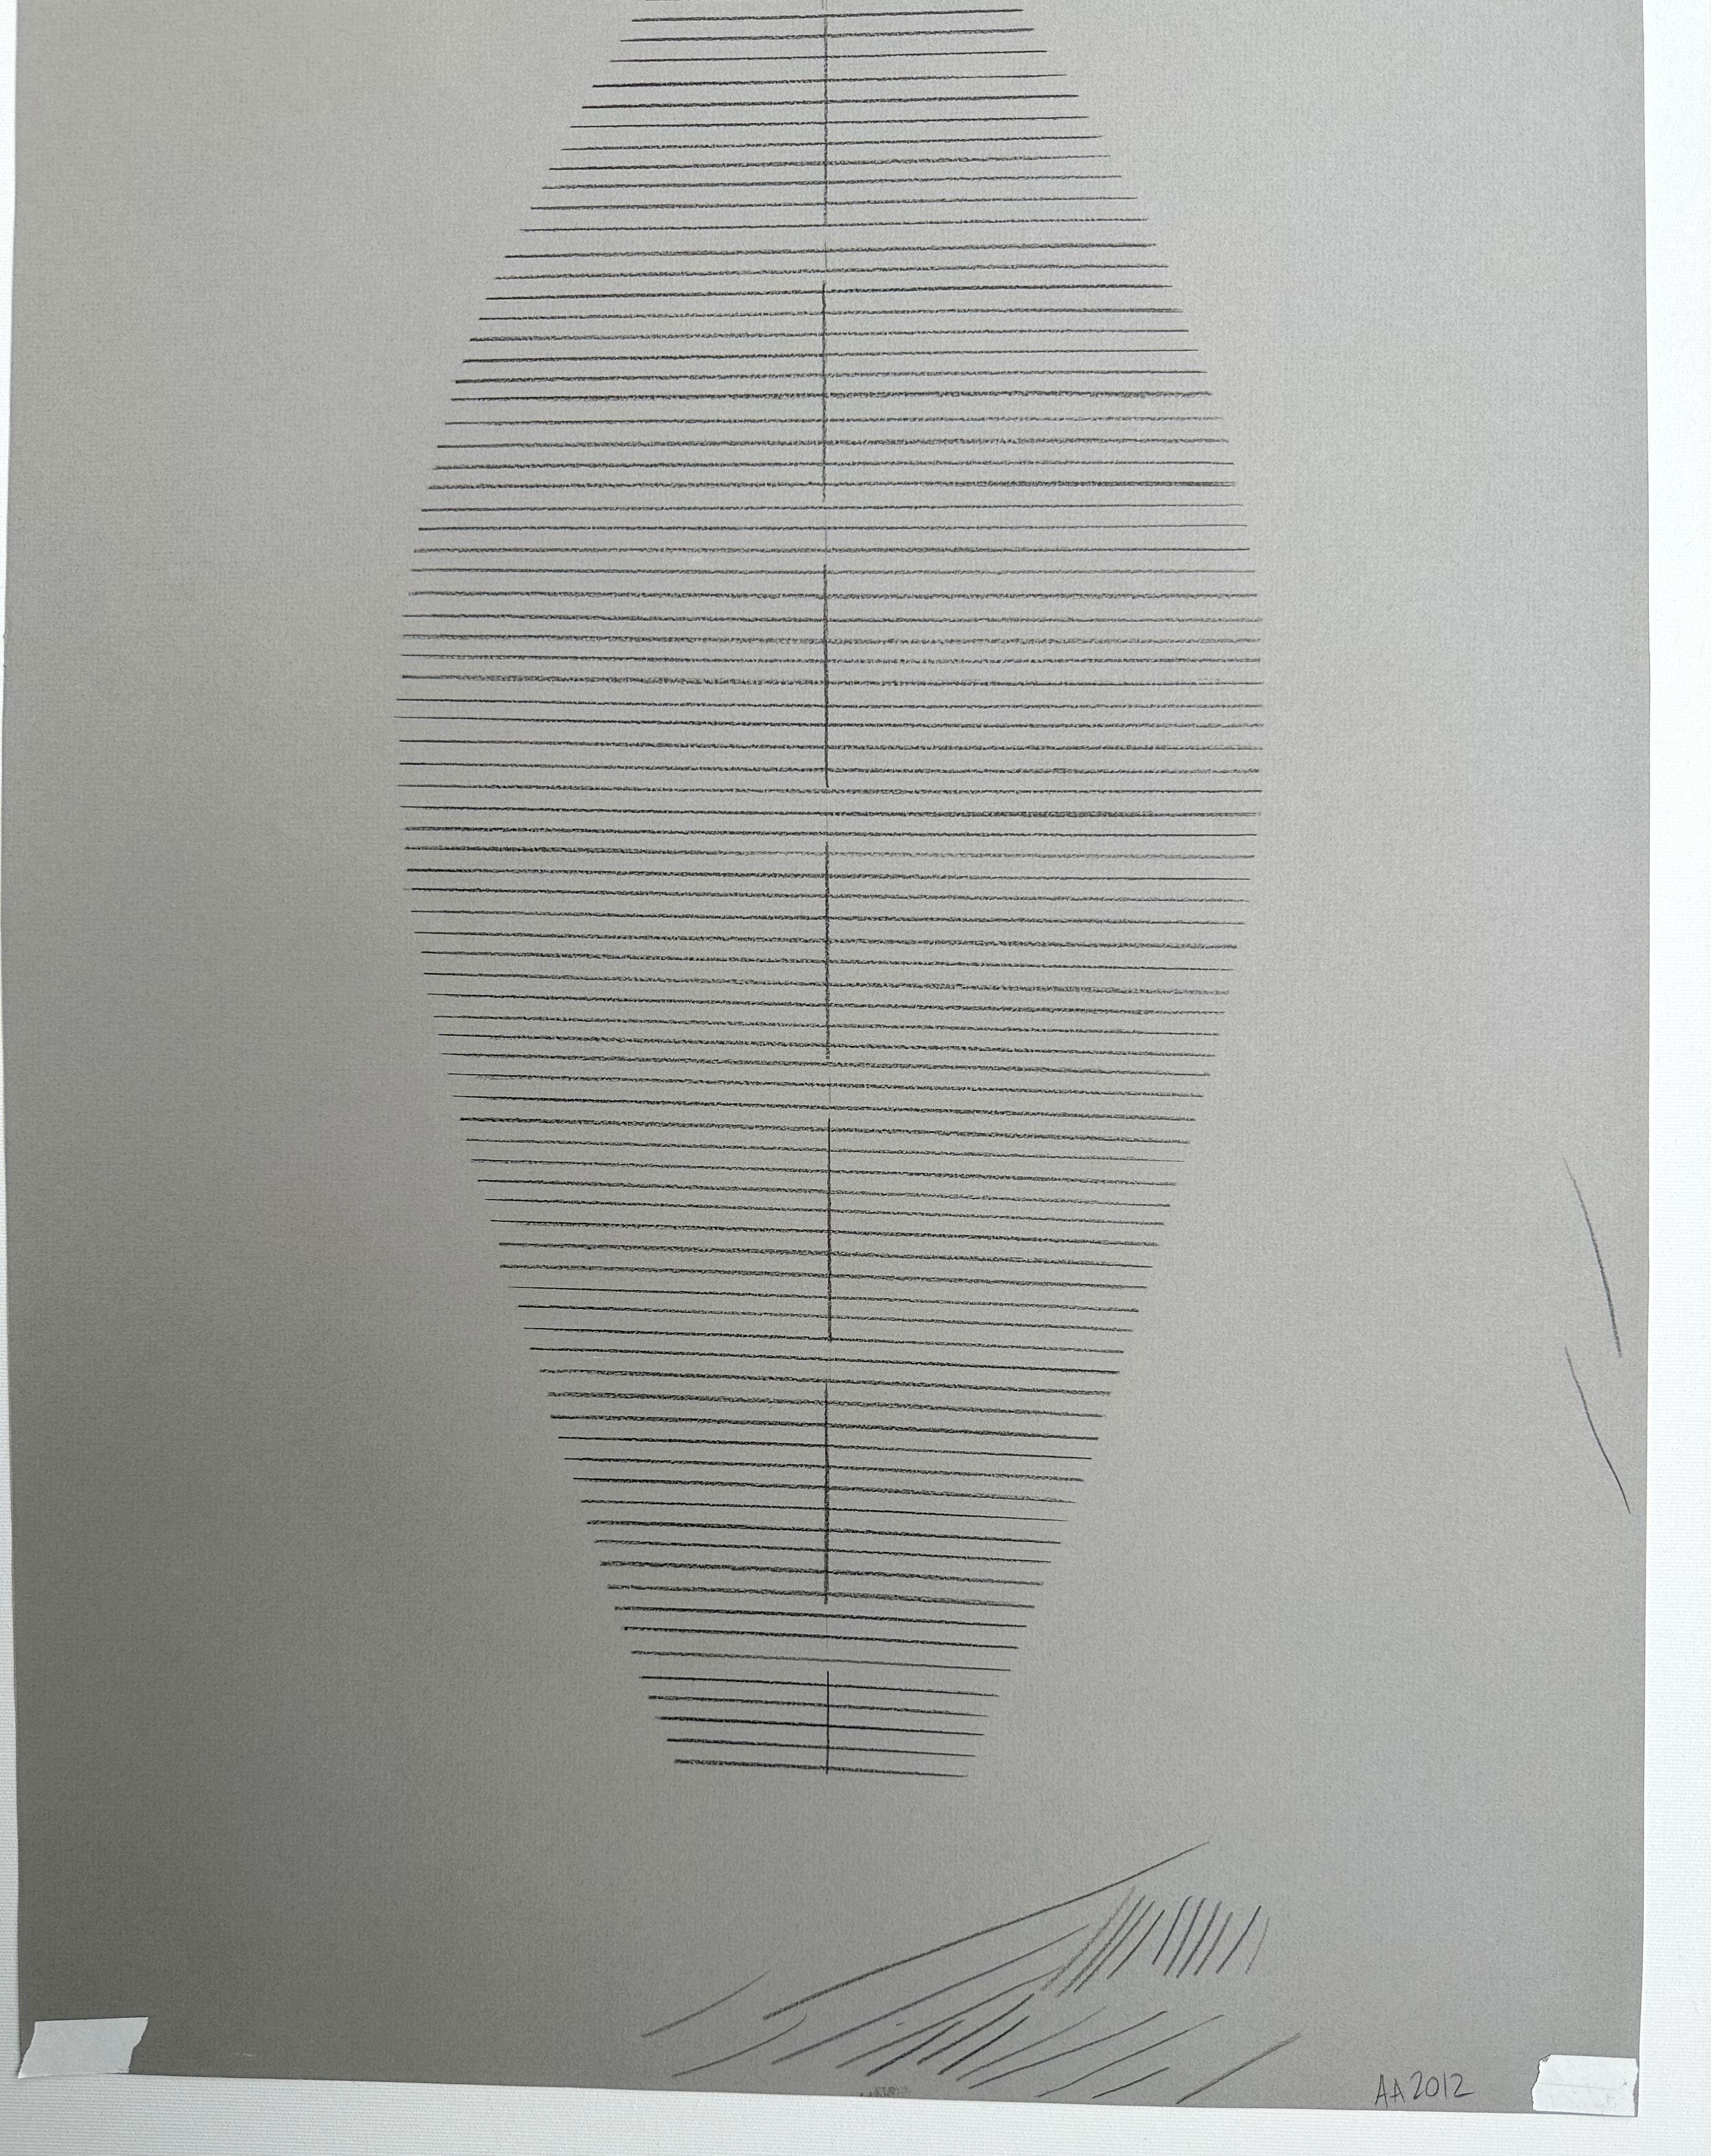 One in a series of six drawings by Amanda Andersen created during an artist residency at the Vermont Studio Center in 2012. During this residency the artist explored ideas of flight while researching the invention and design of the hot air balloon.